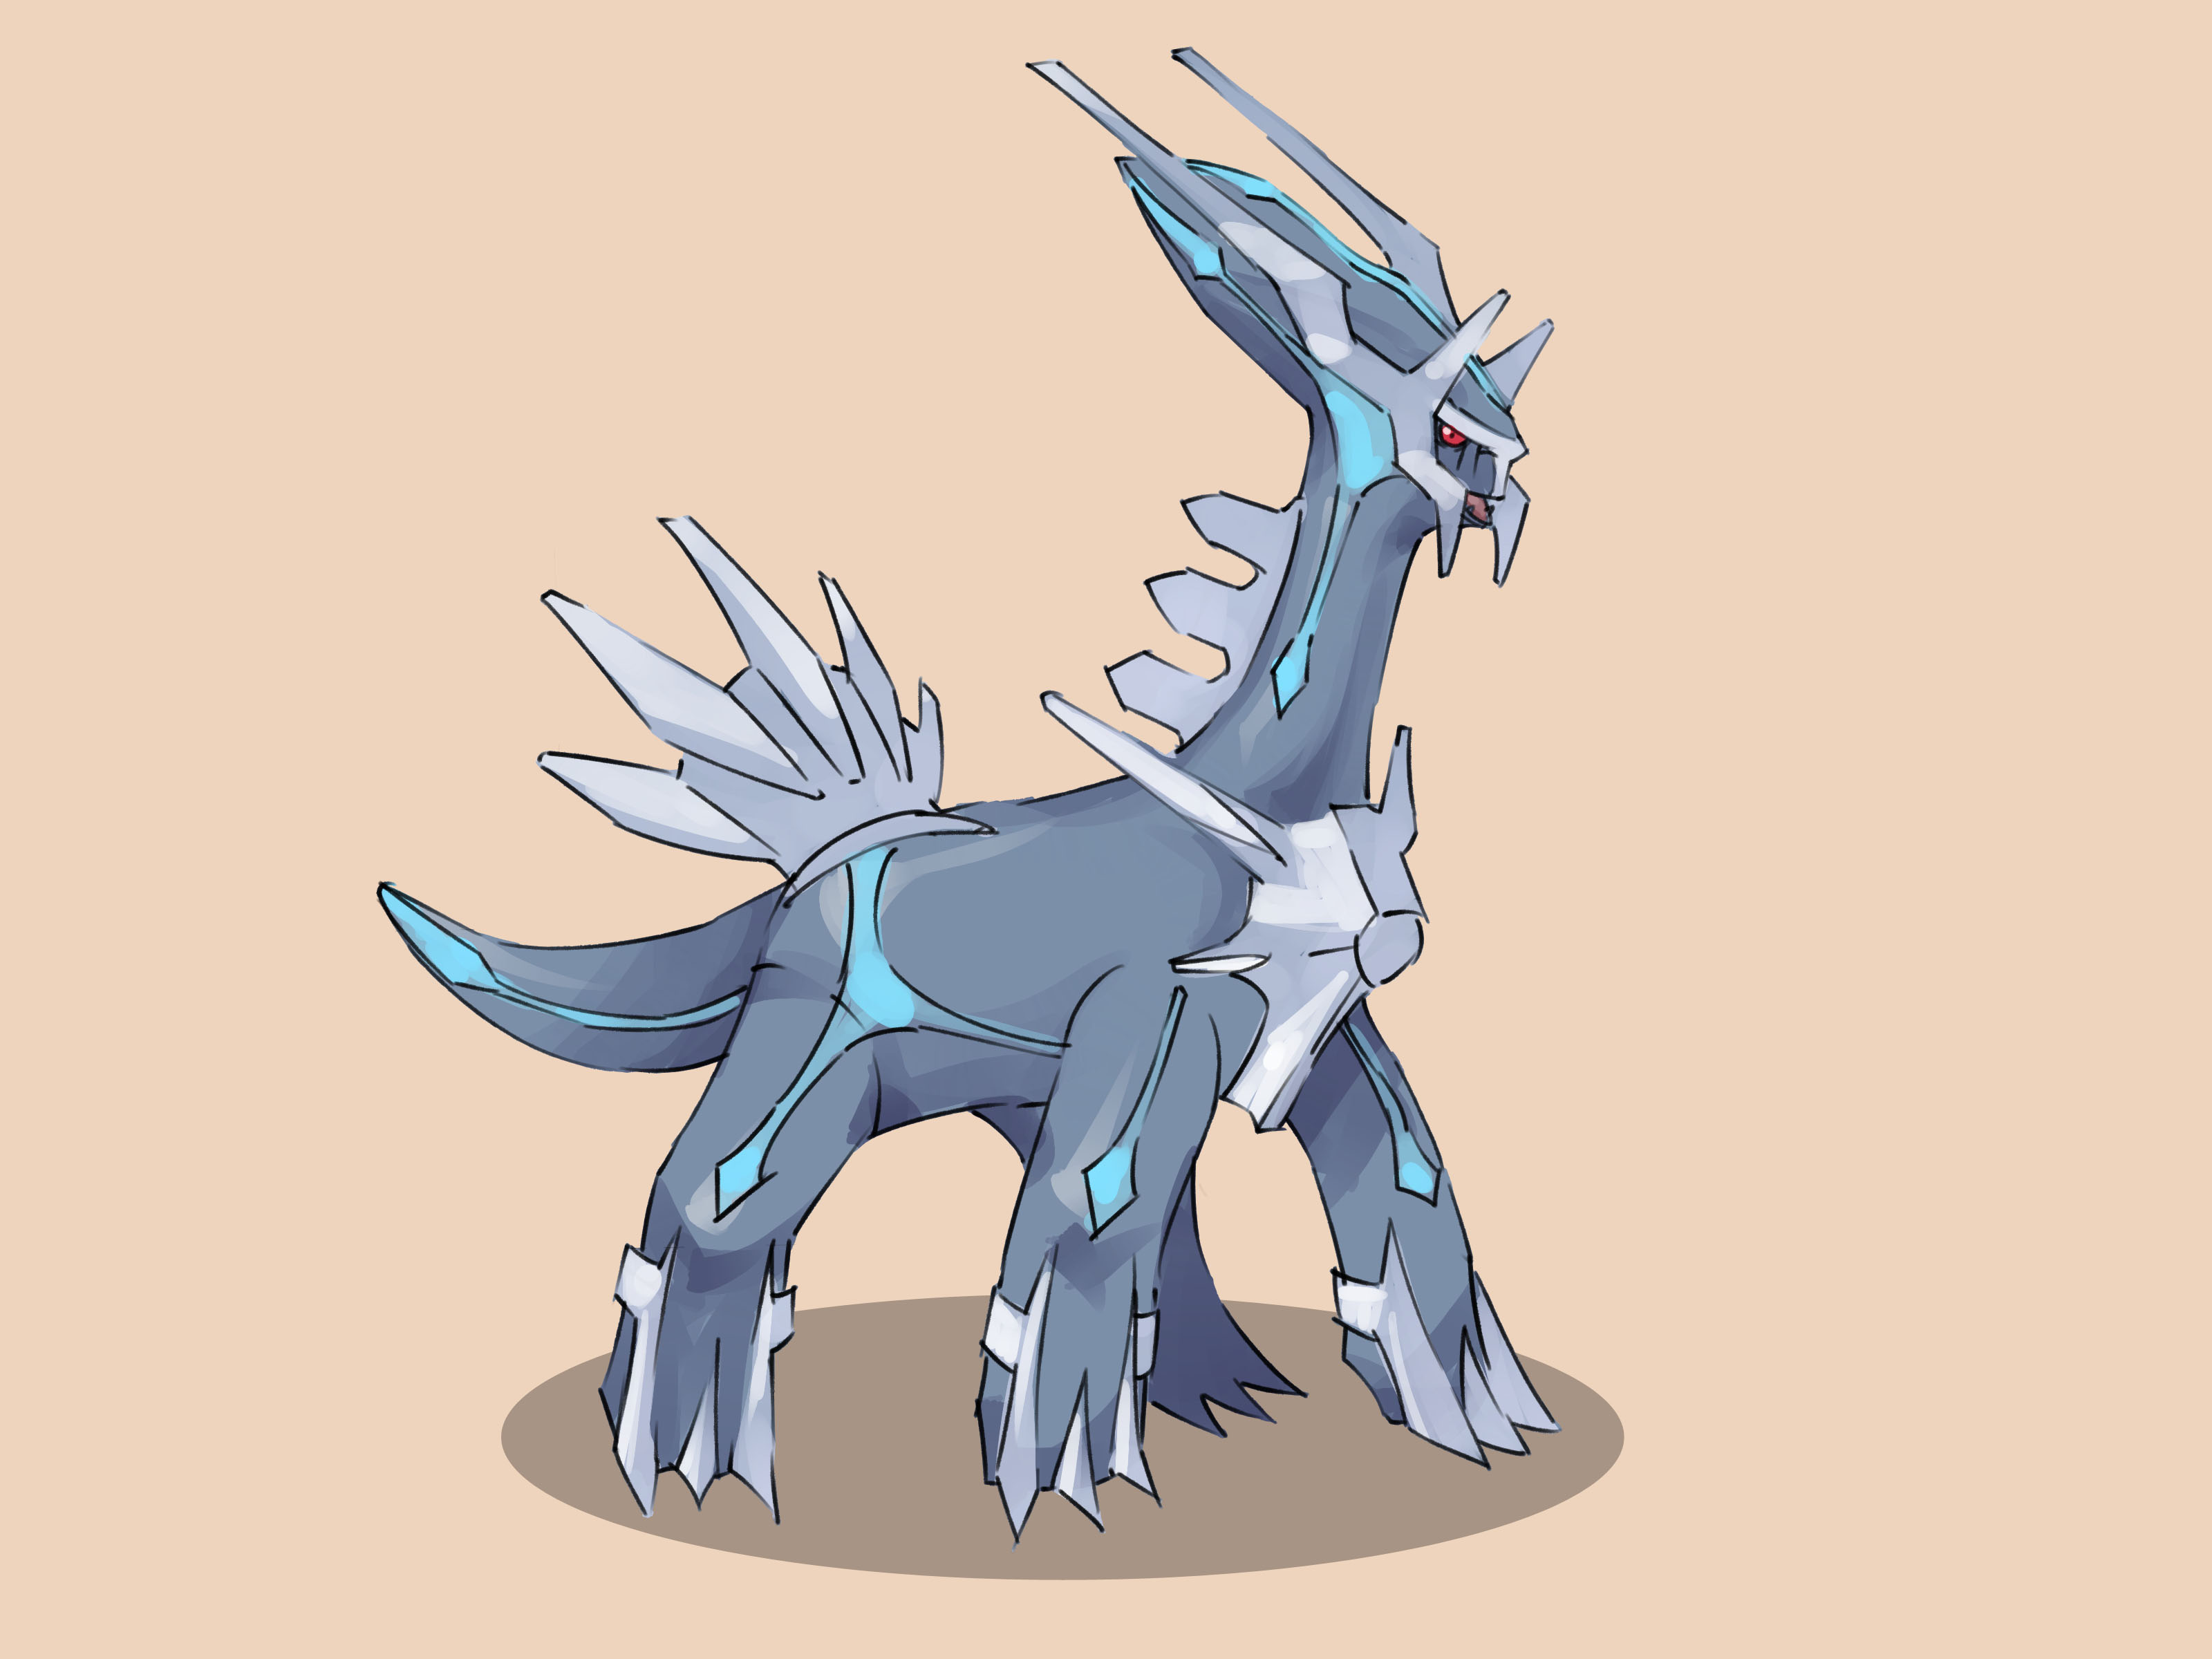 3200x2400 How To Draw Dialga 13 Steps (With Pictures) - Dialga Sketch.